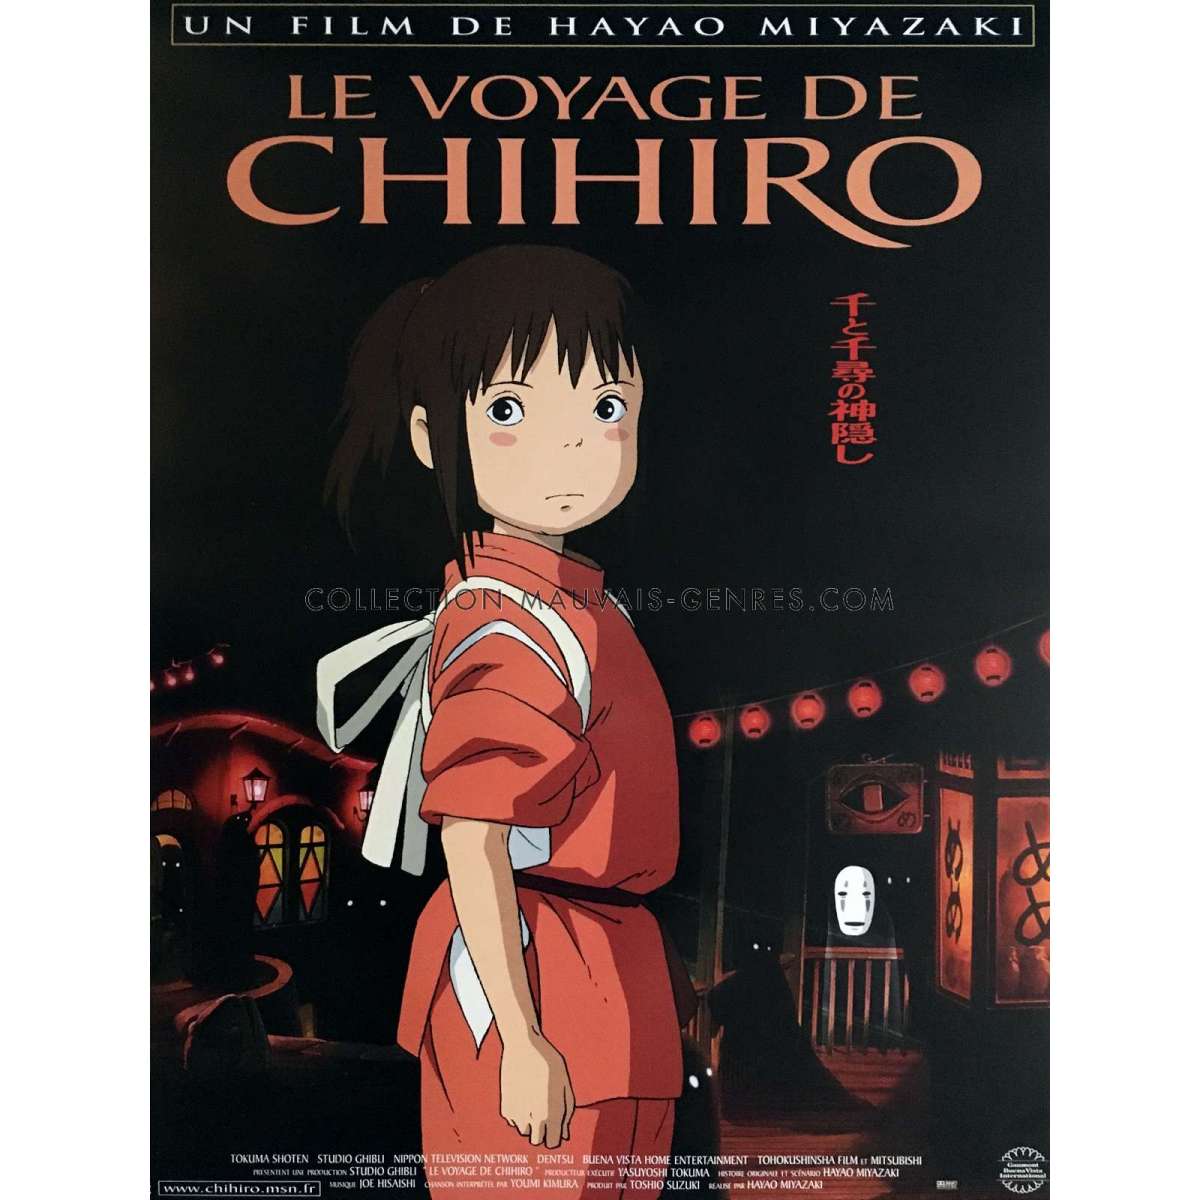 Why Ghibli movies are fascinating?